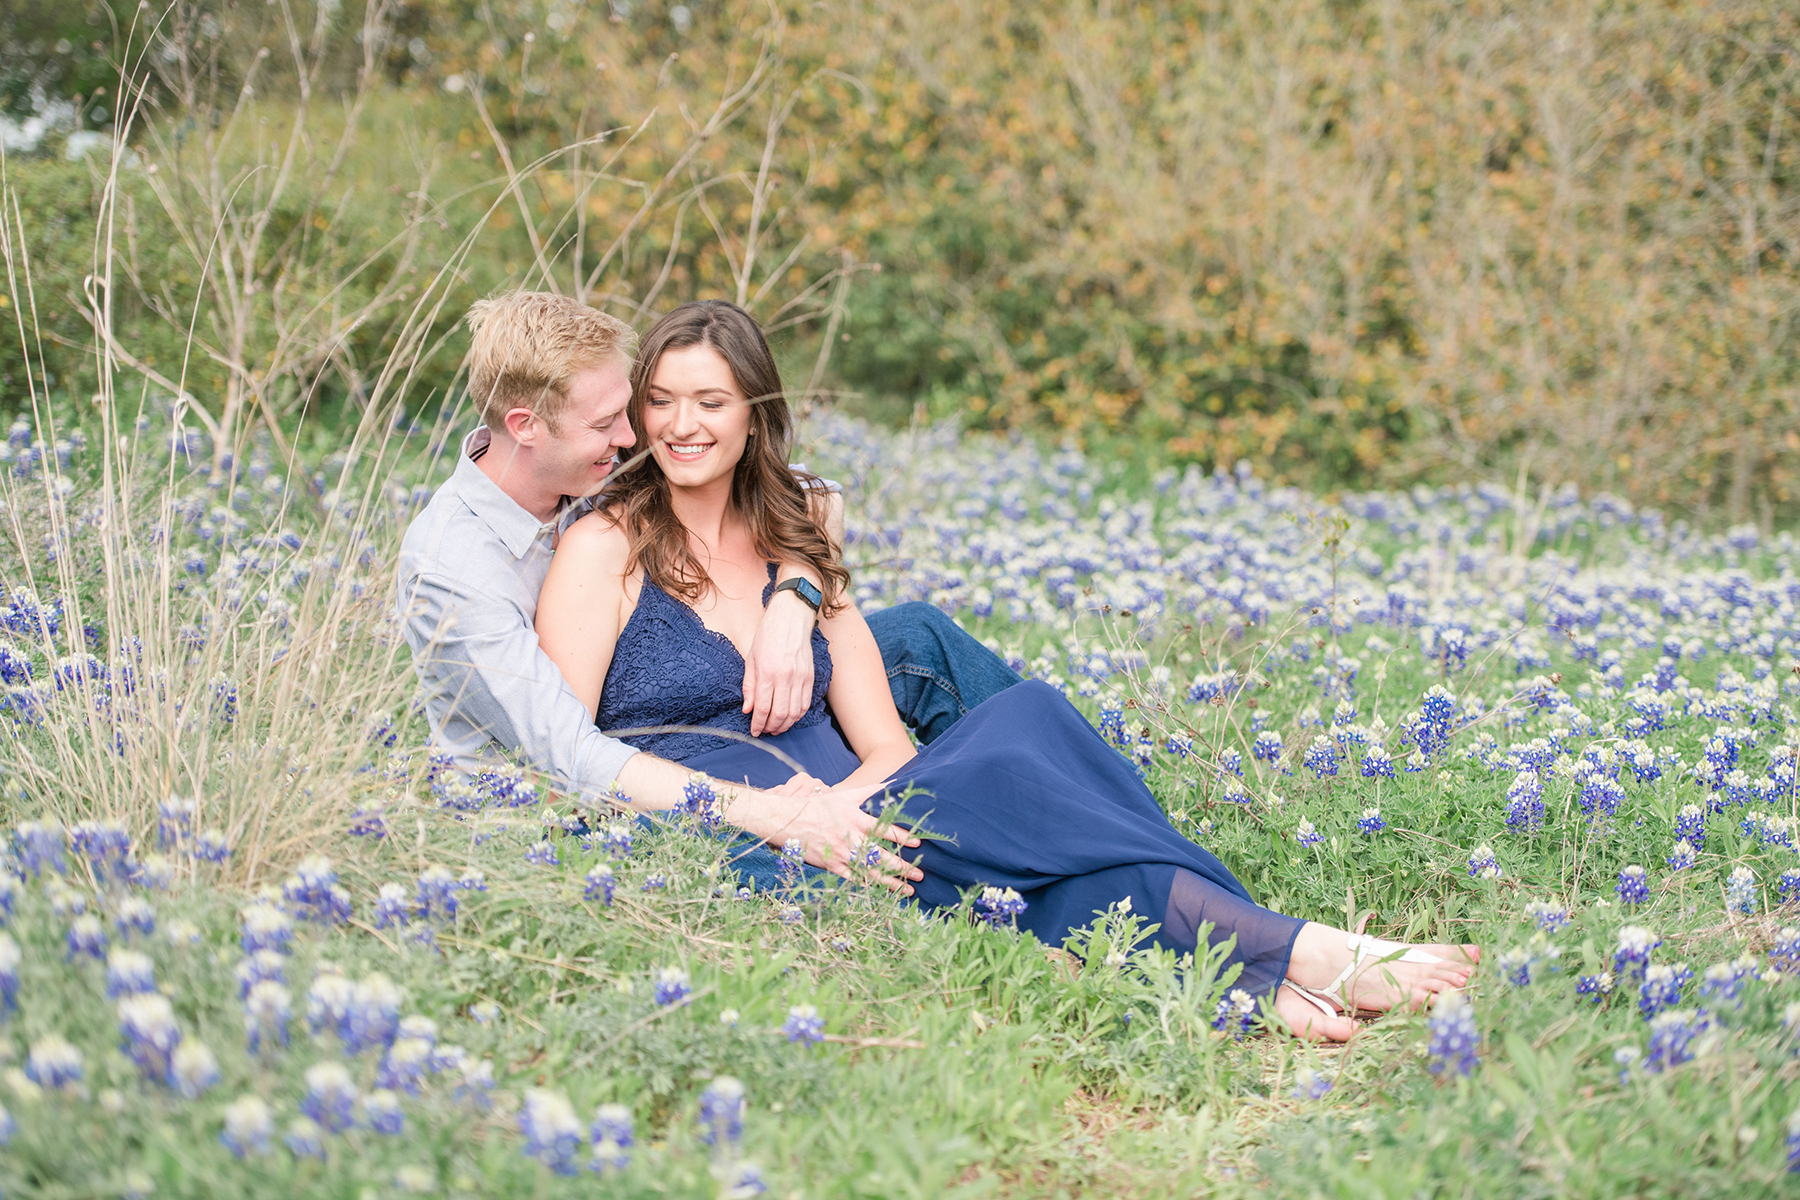 Sitting-field-Bluebonnets-Austin-for-family-photography-mini-session